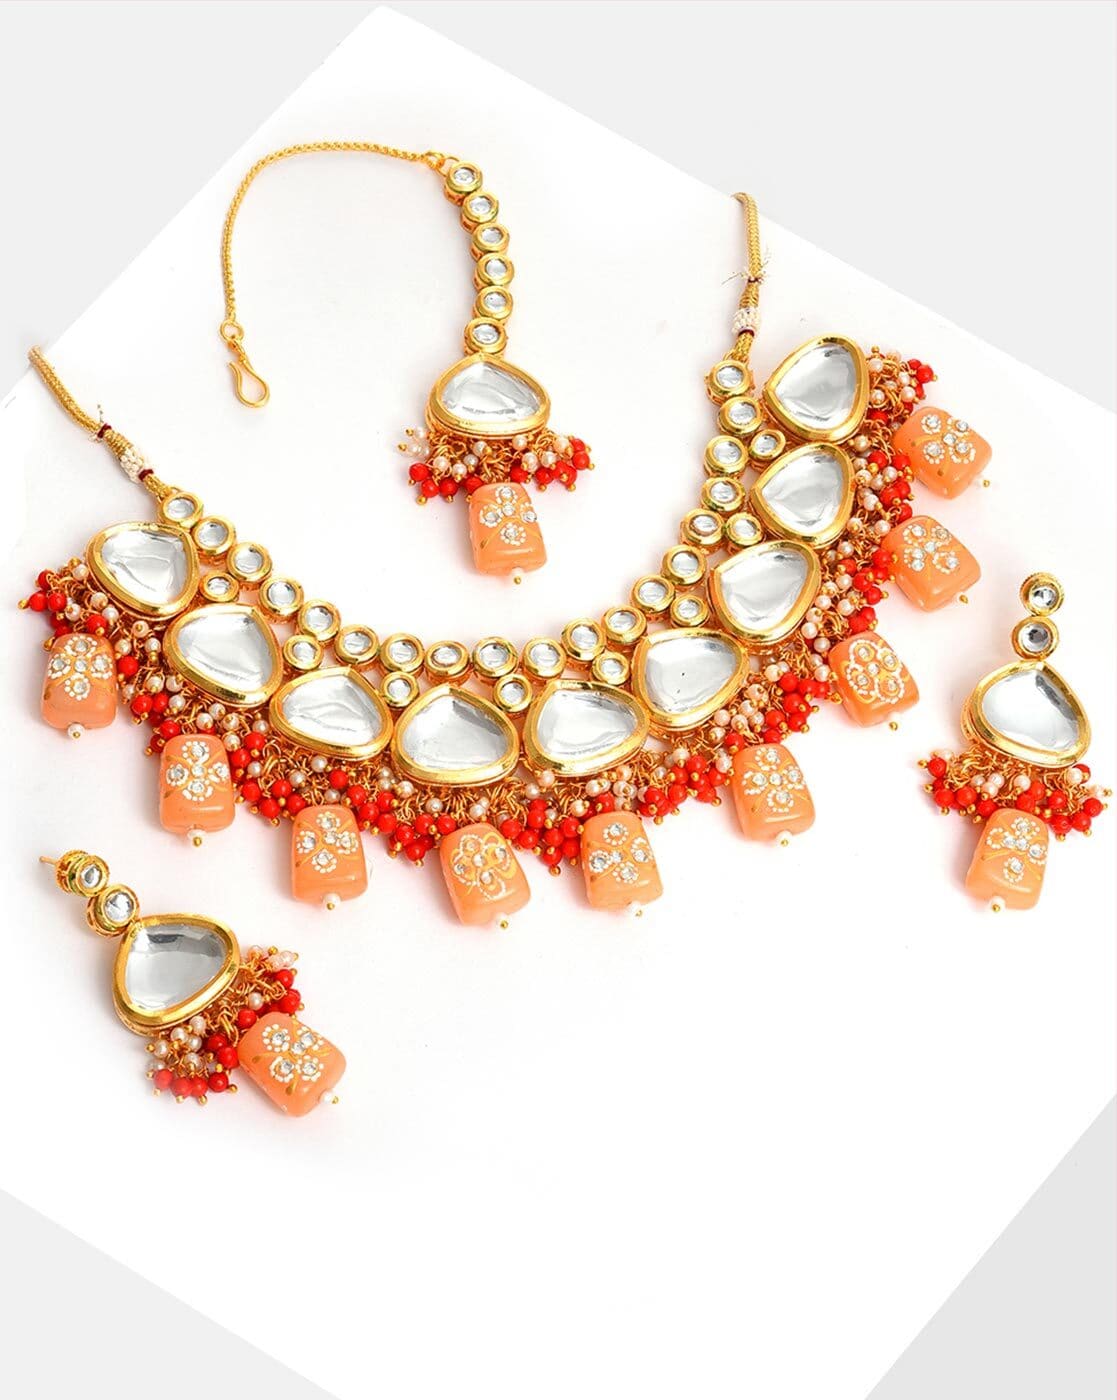 Buy Pinoozclub Orange Fabric Flower Jewellery for Women and Gilrs | Bride Jewellery  Set | Necklace | Earring | Maangtika | Hathfool | Pack of 1 at Amazon.in